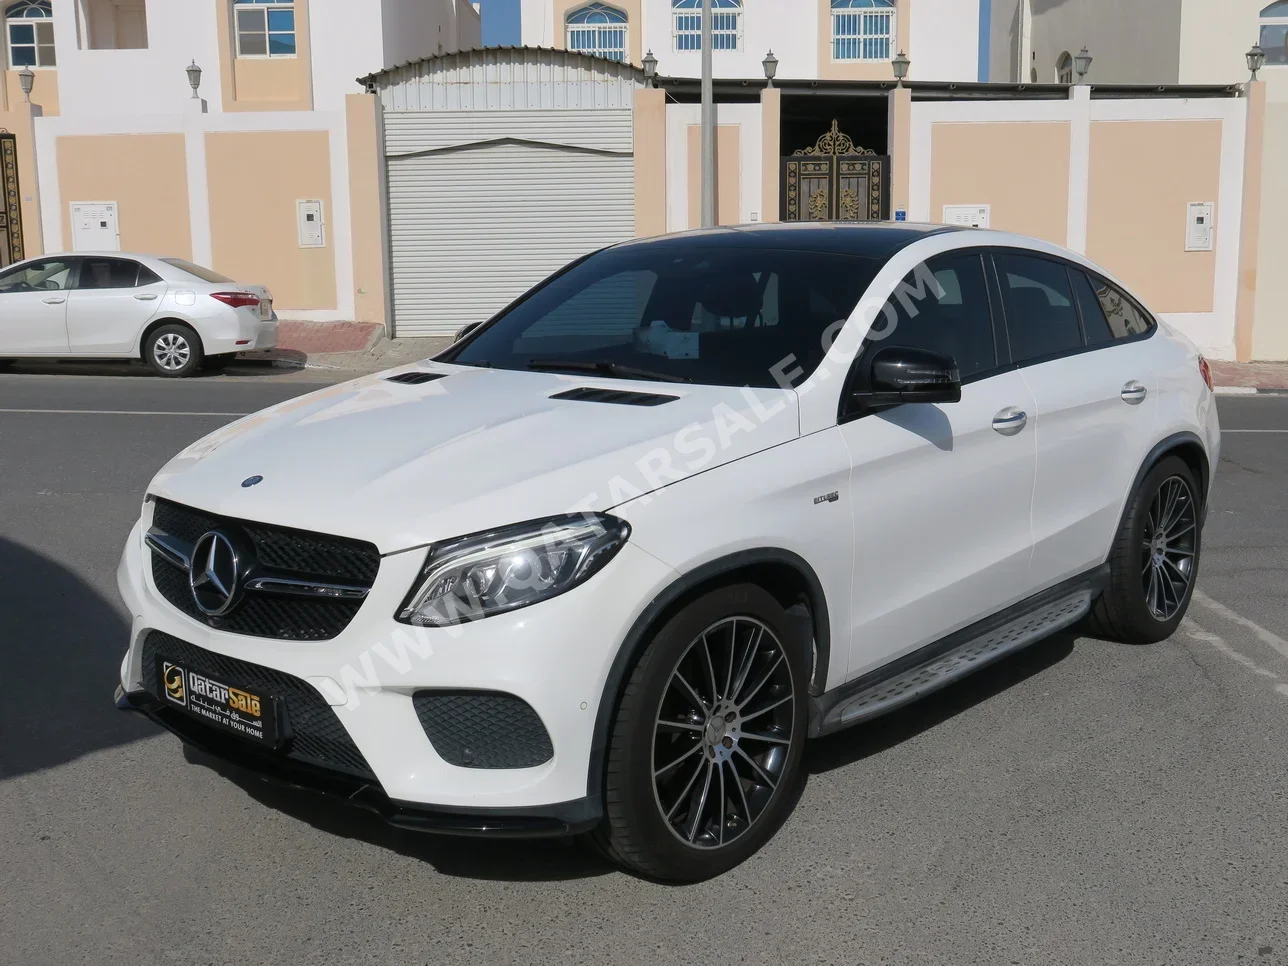  Mercedes-Benz  GLE  43 AMG  2017  Automatic  126,000 Km  6 Cylinder  Four Wheel Drive (4WD)  SUV  White  With Warranty